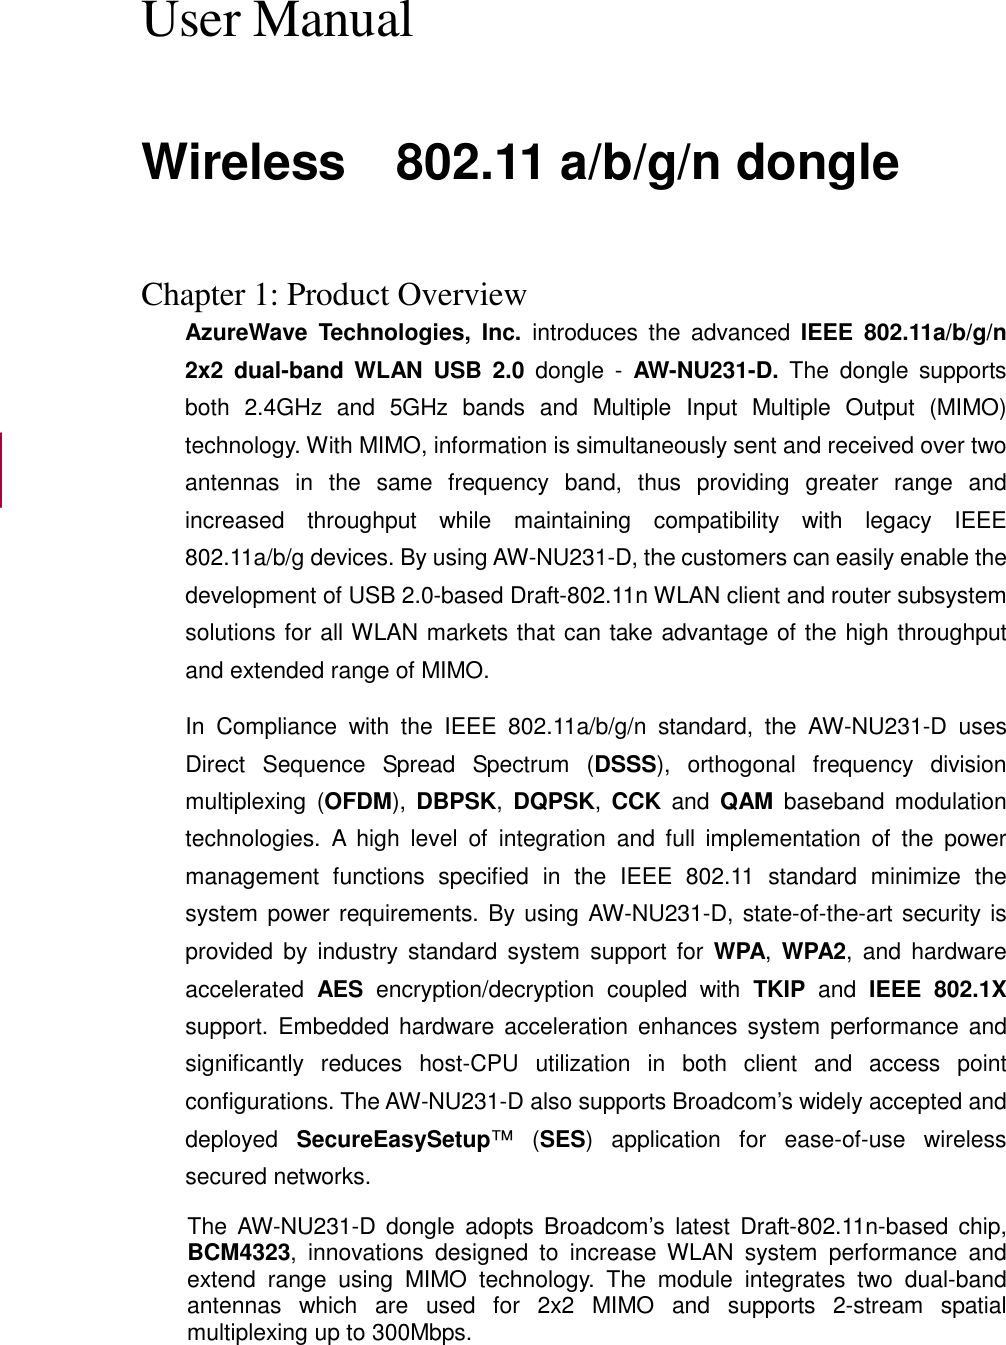  User Manual  Wireless    802.11 a/b/g/n dongle   Chapter 1: Product Overview AzureWave  Technologies,  Inc.  introduces  the  advanced  IEEE  802.11a/b/g/n 2x2  dual-band  WLAN  USB  2.0  dongle  -  AW-NU231-D.  The  dongle  supports both  2.4GHz  and  5GHz  bands  and  Multiple  Input  Multiple  Output  (MIMO) technology. With MIMO, information is simultaneously sent and received over two antennas  in  the  same  frequency  band,  thus  providing  greater  range  and increased  throughput  while  maintaining  compatibility  with  legacy  IEEE 802.11a/b/g devices. By using AW-NU231-D, the customers can easily enable the development of USB 2.0-based Draft-802.11n WLAN client and router subsystem solutions for all WLAN markets that can take advantage of the high throughput and extended range of MIMO. In  Compliance  with  the  IEEE  802.11a/b/g/n  standard,  the  AW-NU231-D  uses Direct  Sequence  Spread  Spectrum  (DSSS),  orthogonal  frequency  division multiplexing (OFDM),  DBPSK,  DQPSK,  CCK  and  QAM  baseband  modulation technologies.  A  high  level  of  integration  and  full  implementation  of  the  power management  functions  specified  in  the  IEEE  802.11  standard  minimize  the system power requirements. By using AW-NU231-D, state-of-the-art security is provided by  industry  standard  system  support  for  WPA,  WPA2,  and  hardware accelerated  AES  encryption/decryption  coupled  with  TKIP  and  IEEE  802.1X support.  Embedded  hardware acceleration  enhances system  performance  and significantly  reduces  host-CPU  utilization  in  both  client  and  access  point configurations. The AW-NU231-D also supports Broadcom’s widely accepted and deployed  SecureEasySetup™  (SES)  application  for  ease-of-use  wireless secured networks. The  AW-NU231-D  dongle  adopts  Broadcom’s  latest  Draft-802.11n-based  chip, BCM4323,  innovations  designed  to  increase  WLAN  system  performance  and extend  range  using  MIMO  technology.  The  module  integrates  two  dual-band antennas  which  are  used  for  2x2  MIMO  and  supports  2-stream  spatial multiplexing up to 300Mbps.  